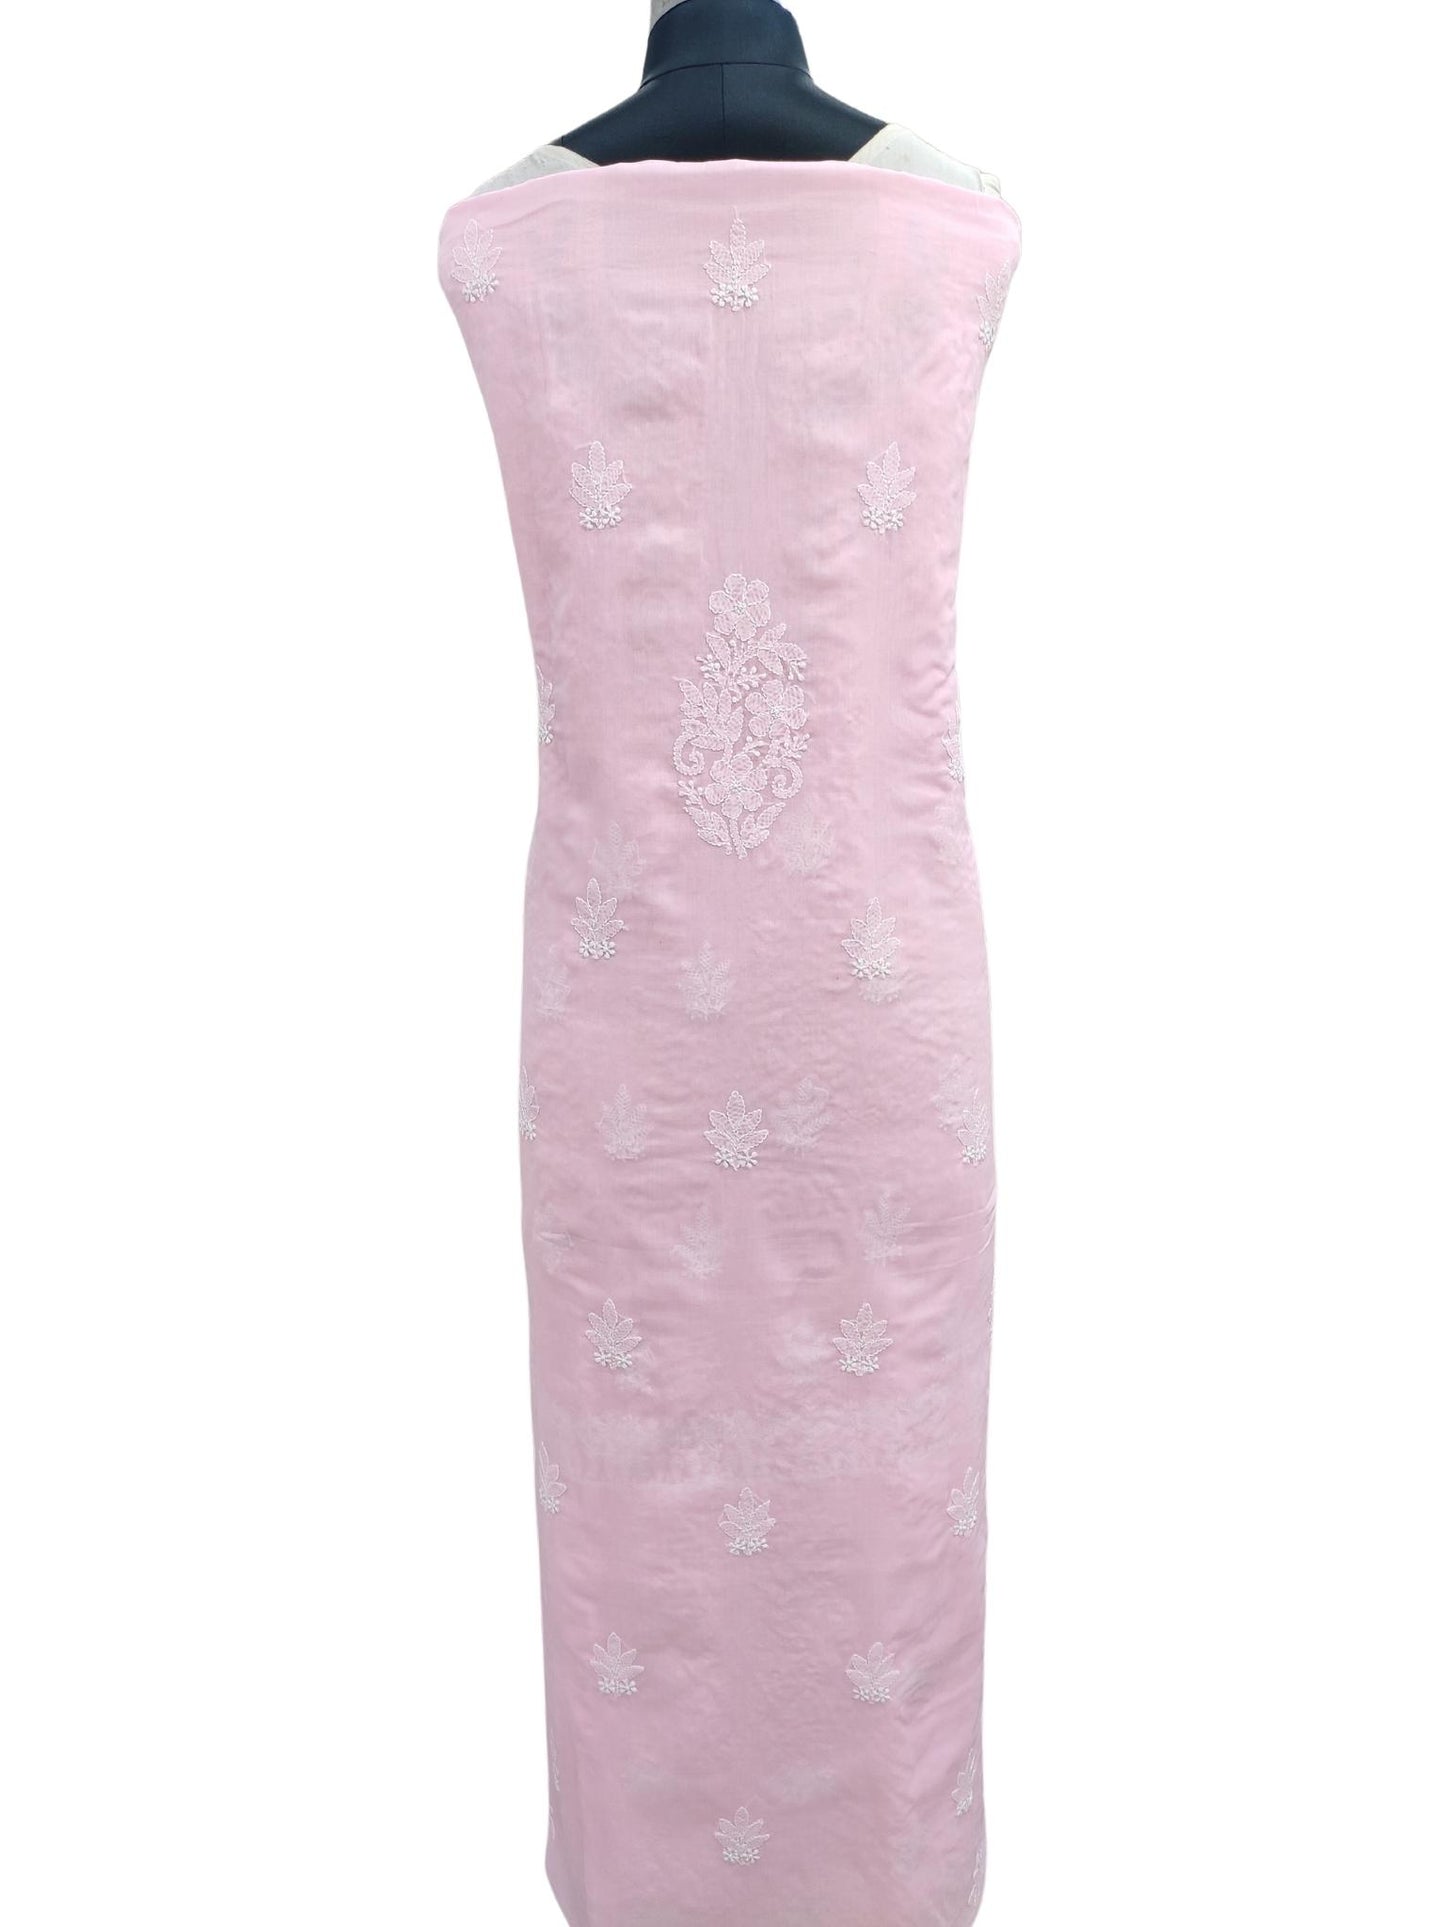 Shyamal Chikan Hand Embroidered Pink Cotton Lucknowi Chikankari Unstitched Suit Piece With Parsi Work - S20855